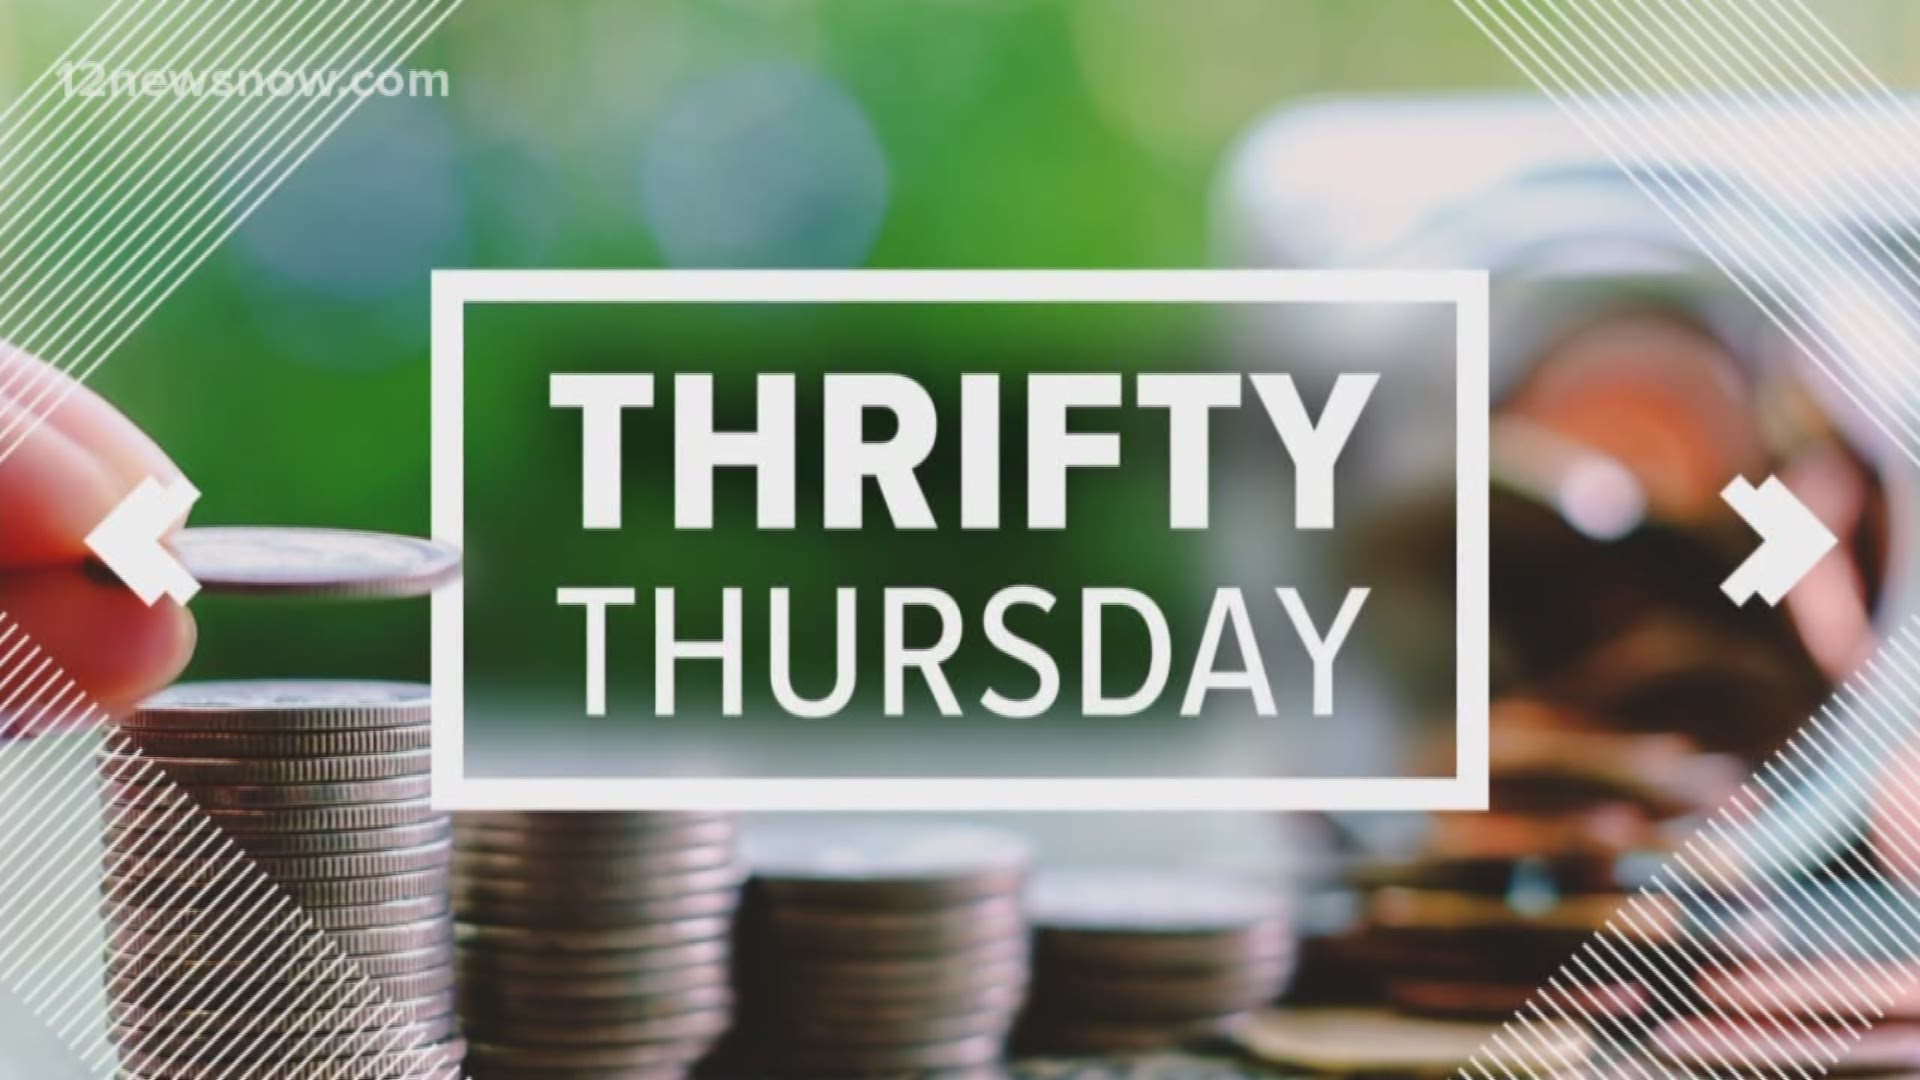 Thrifty Thursday deals on Yeti coolers and Target beauty sets